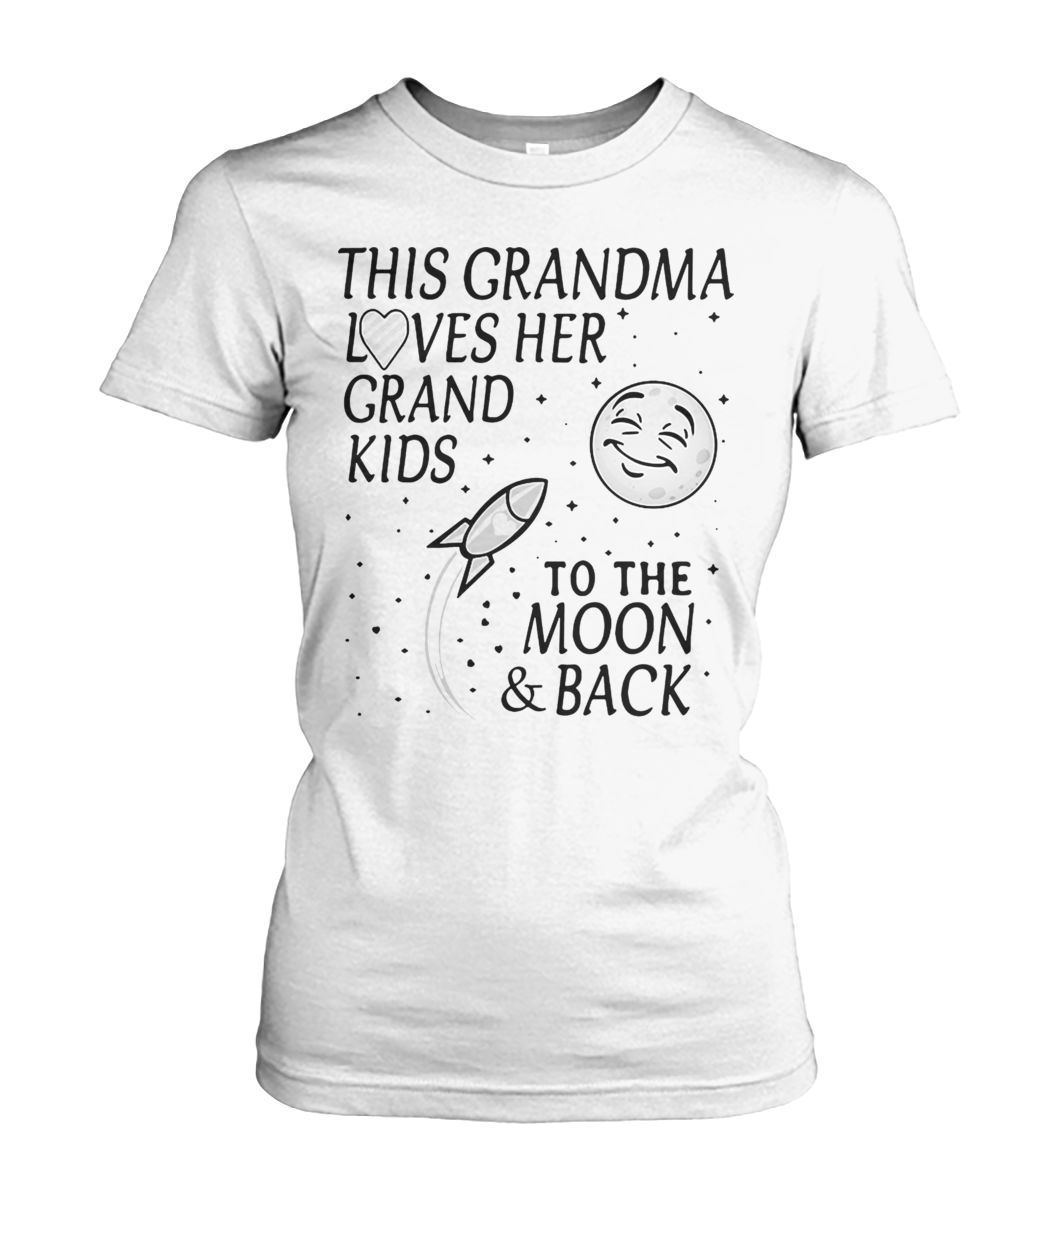 This grandma loves her grandkids to the moon and back women's crew tee